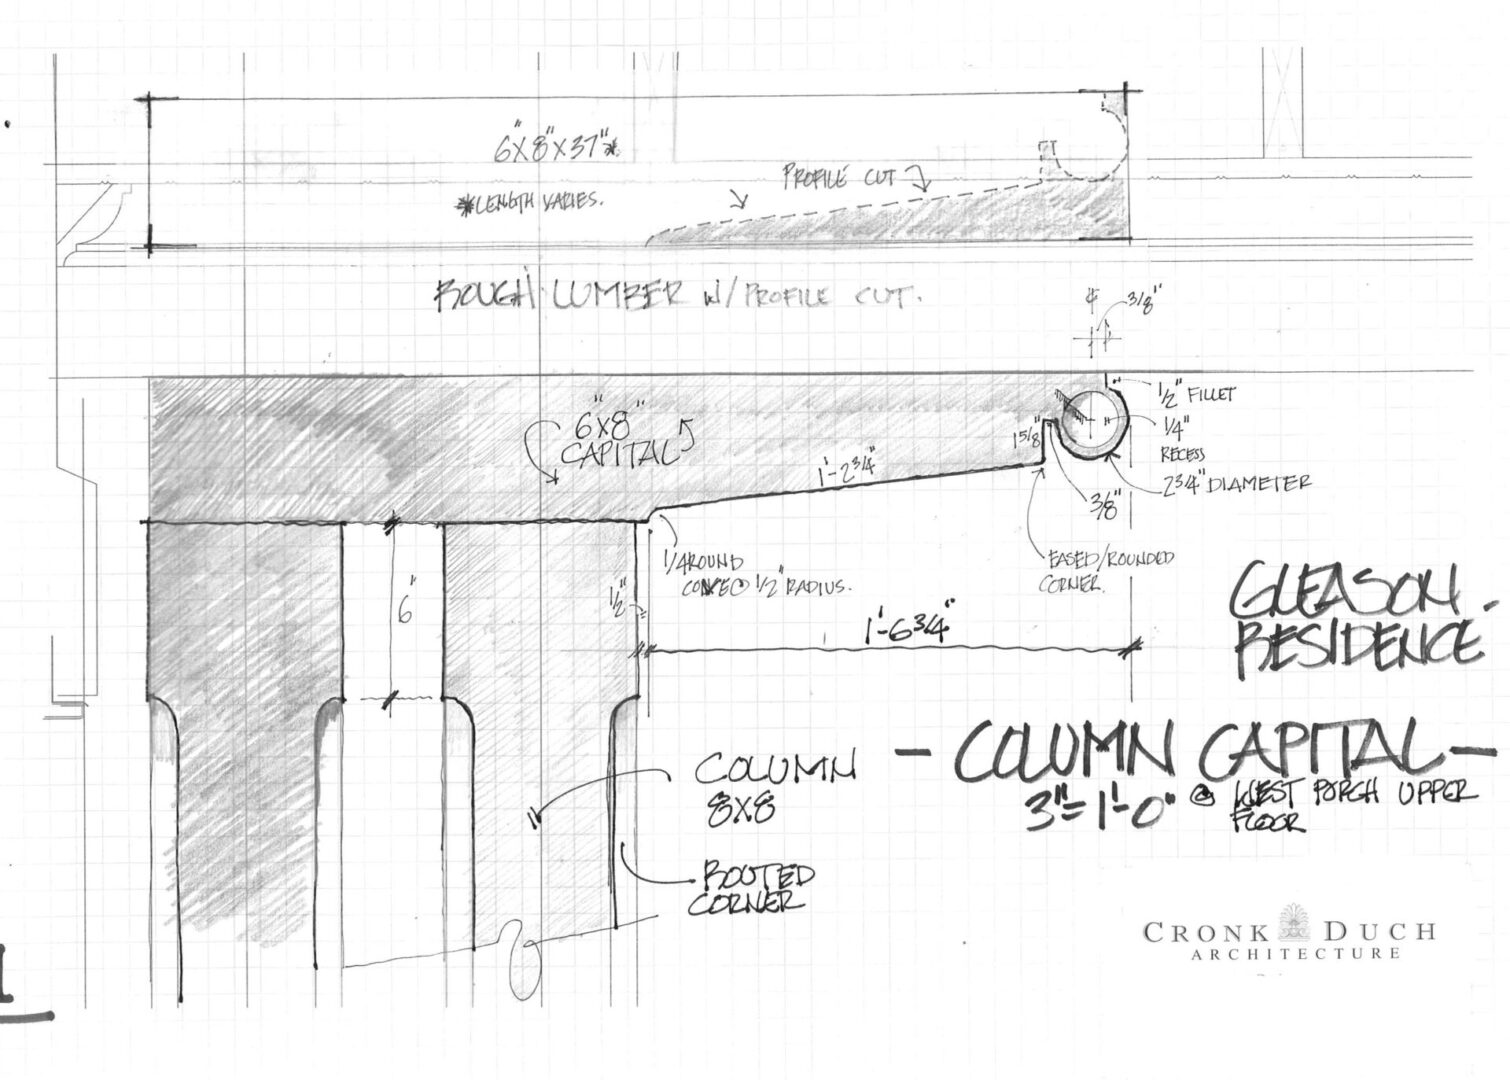 A plan of the building by Cronk Duch Architecture